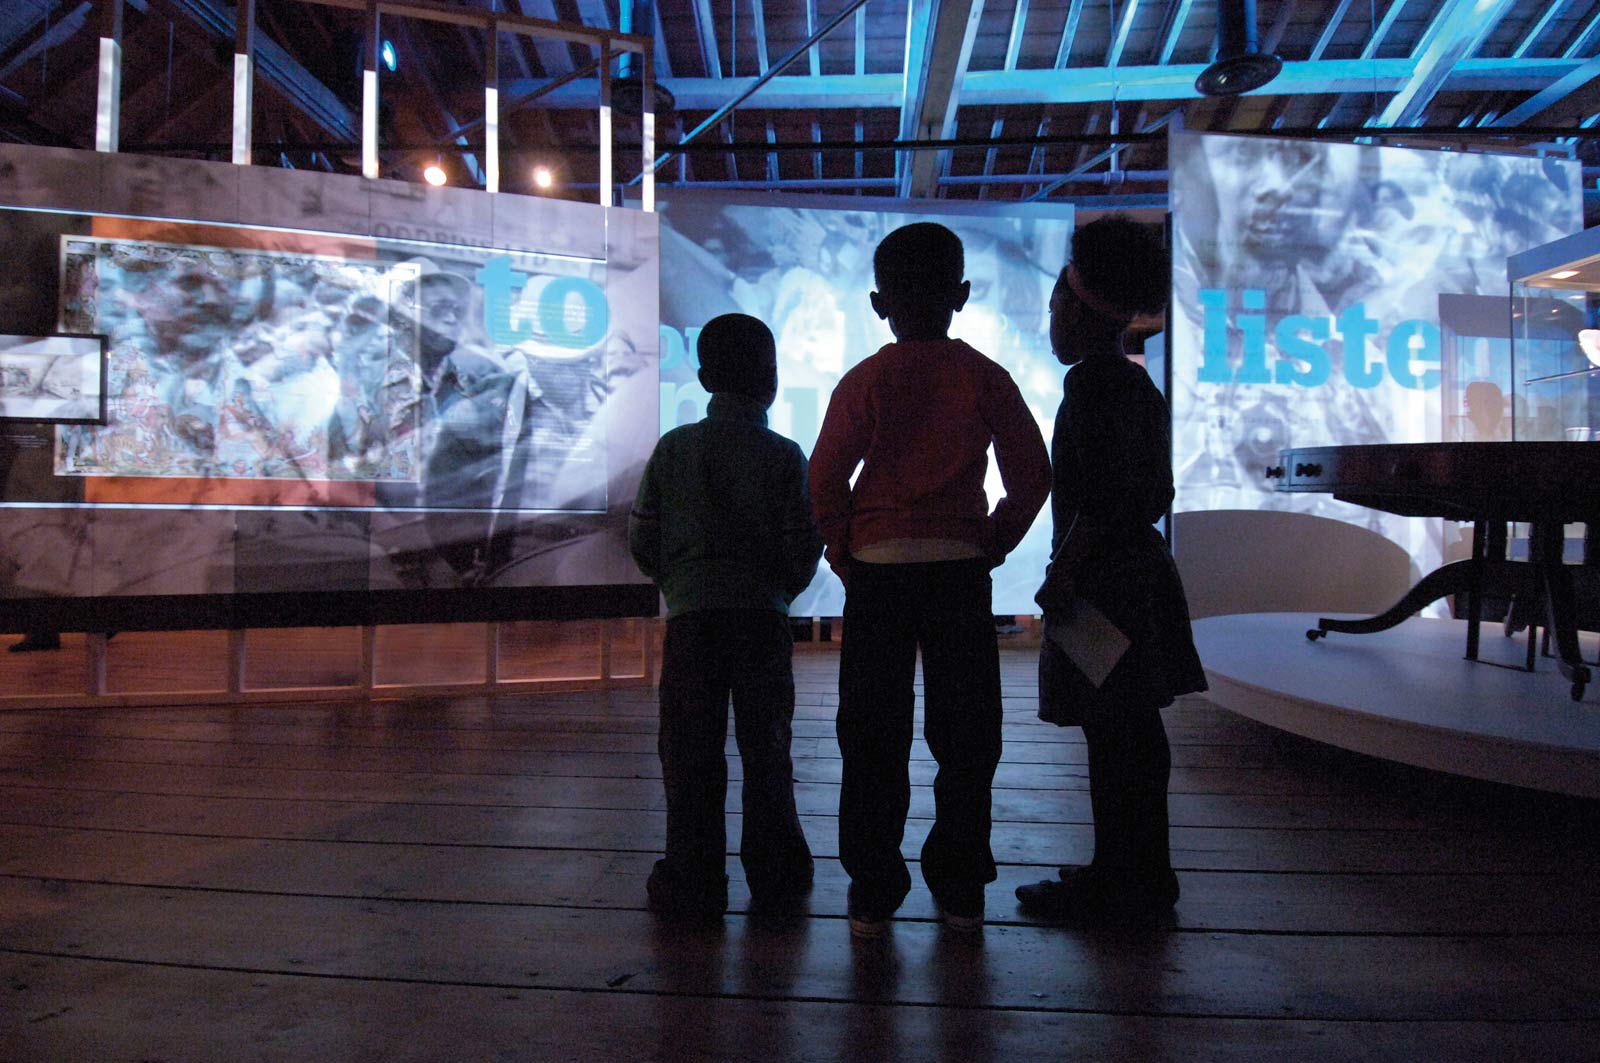 Three children watch a sound and light show in the Sugar and Slavery gallery at the Museum of London Docklands.